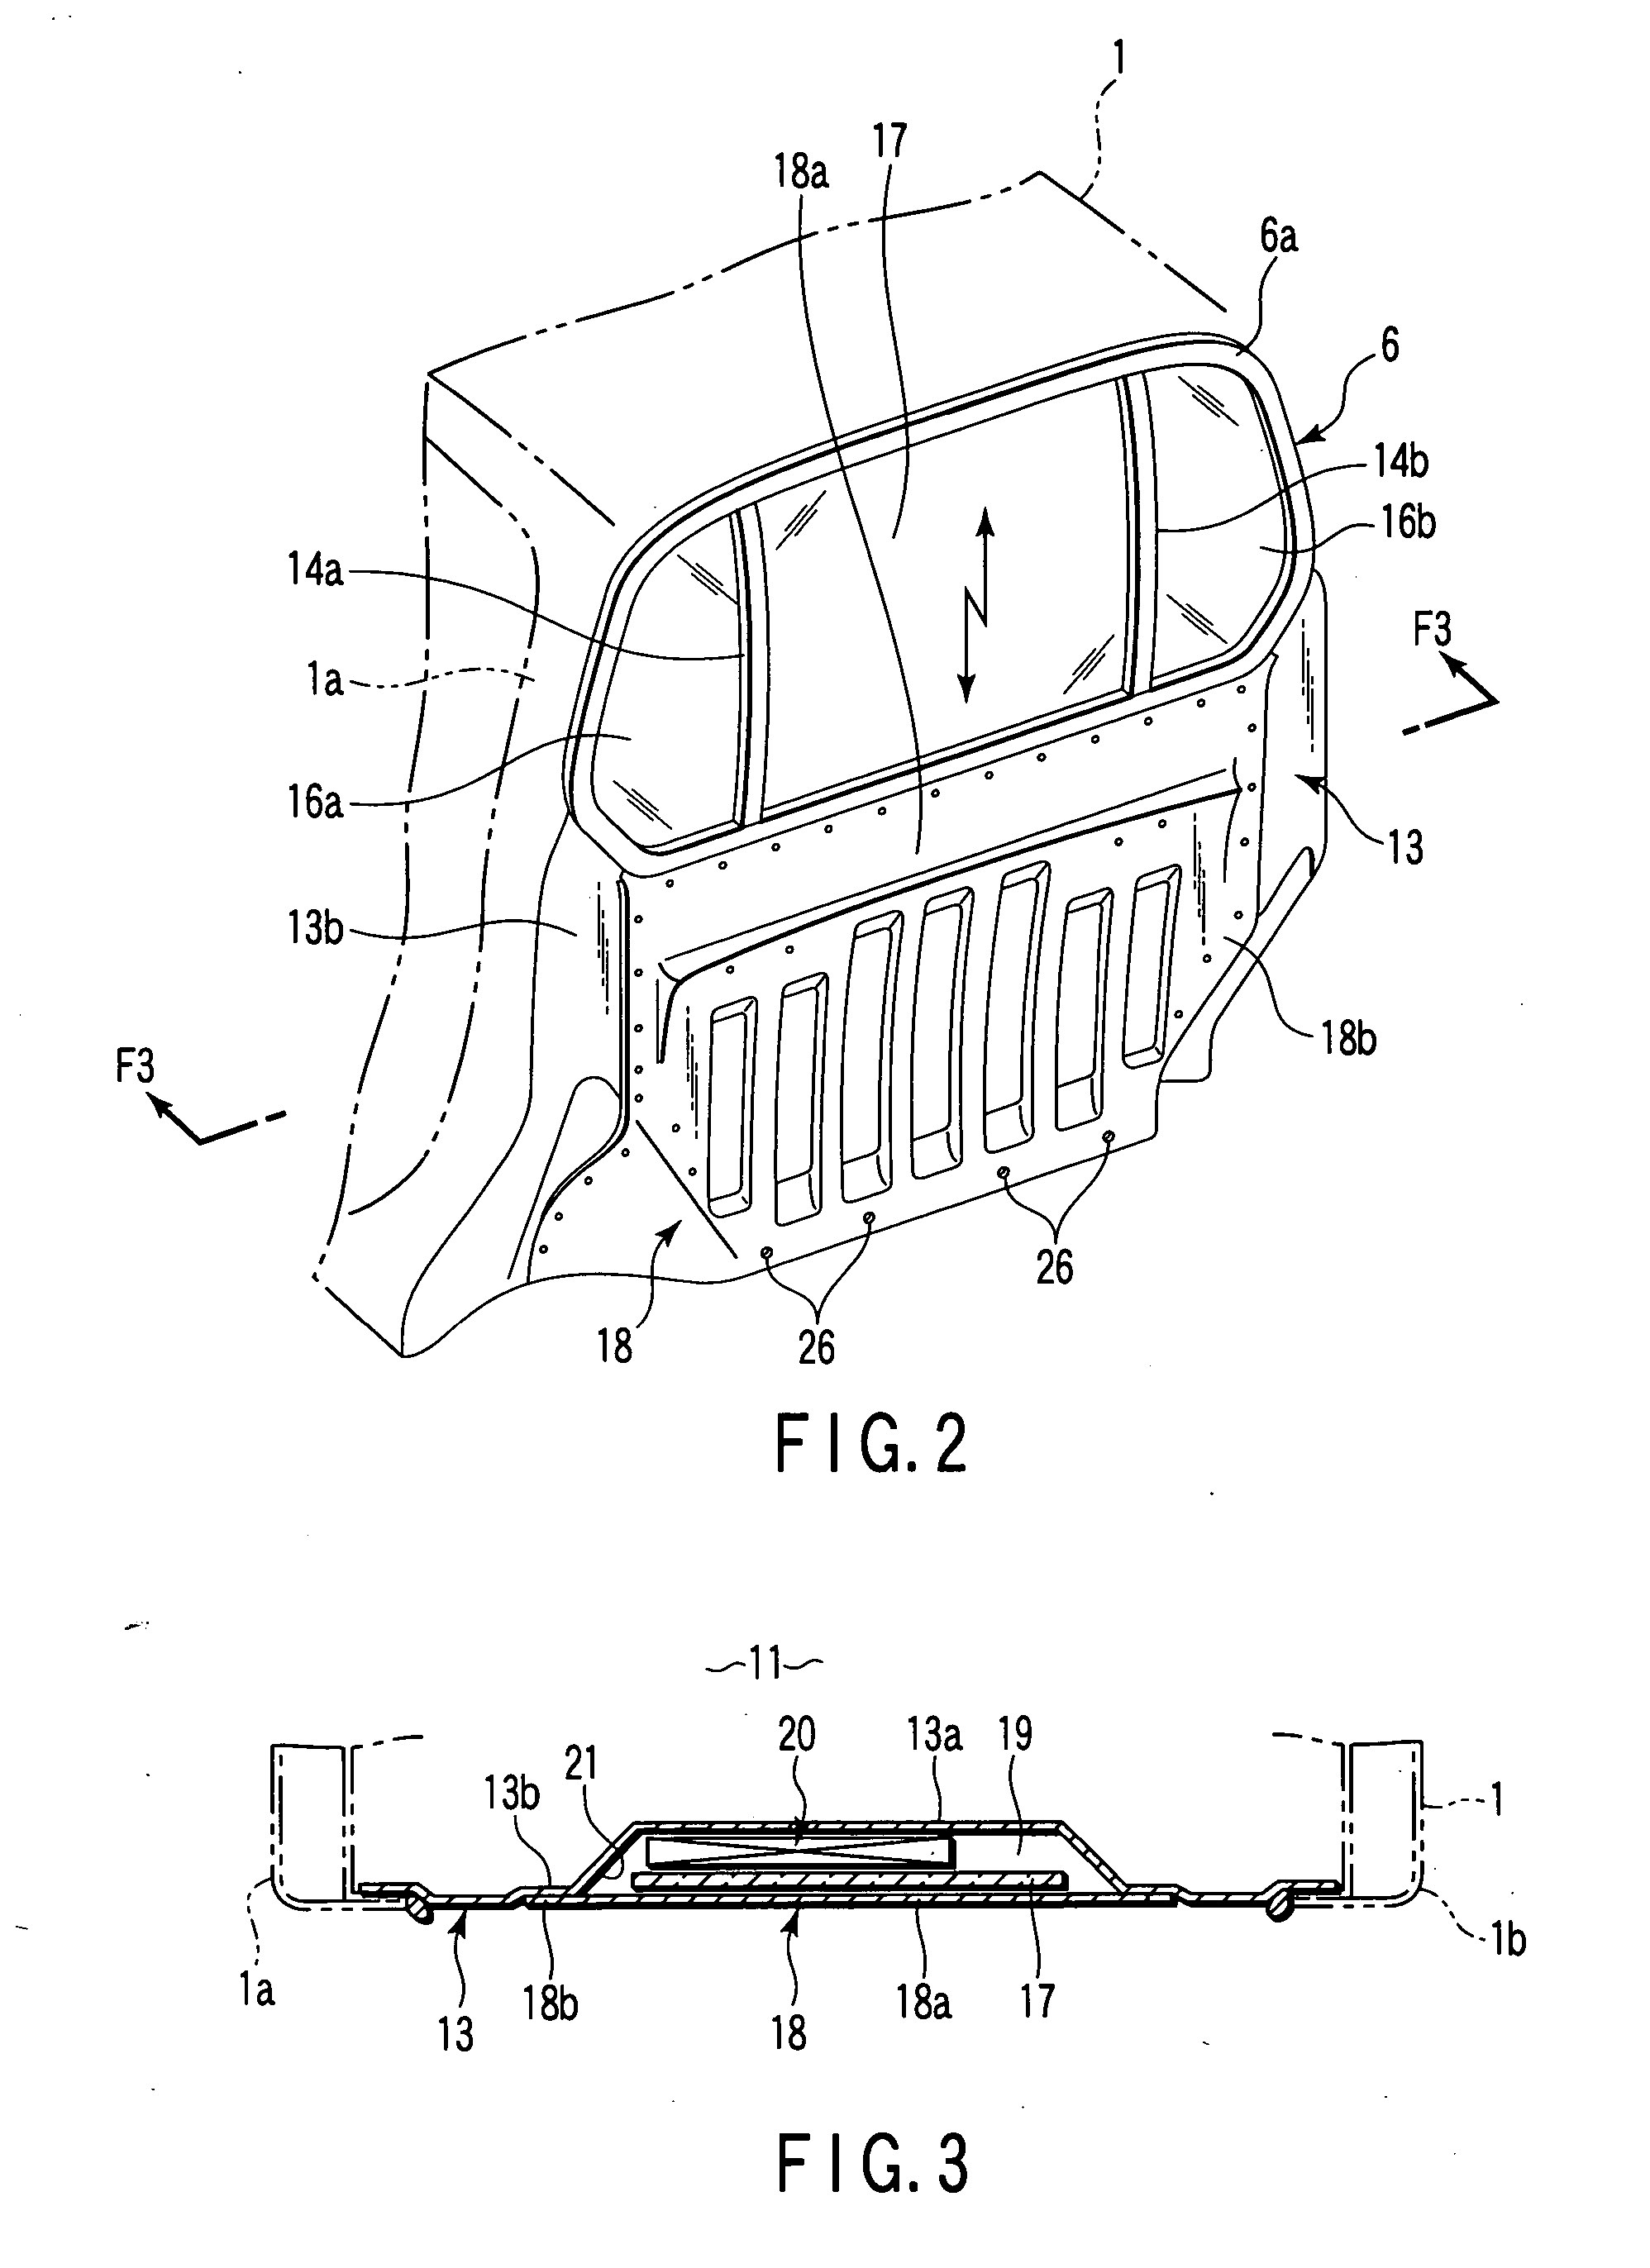 Vehicle having a body structure, which includes a receptacle containing a window regulator